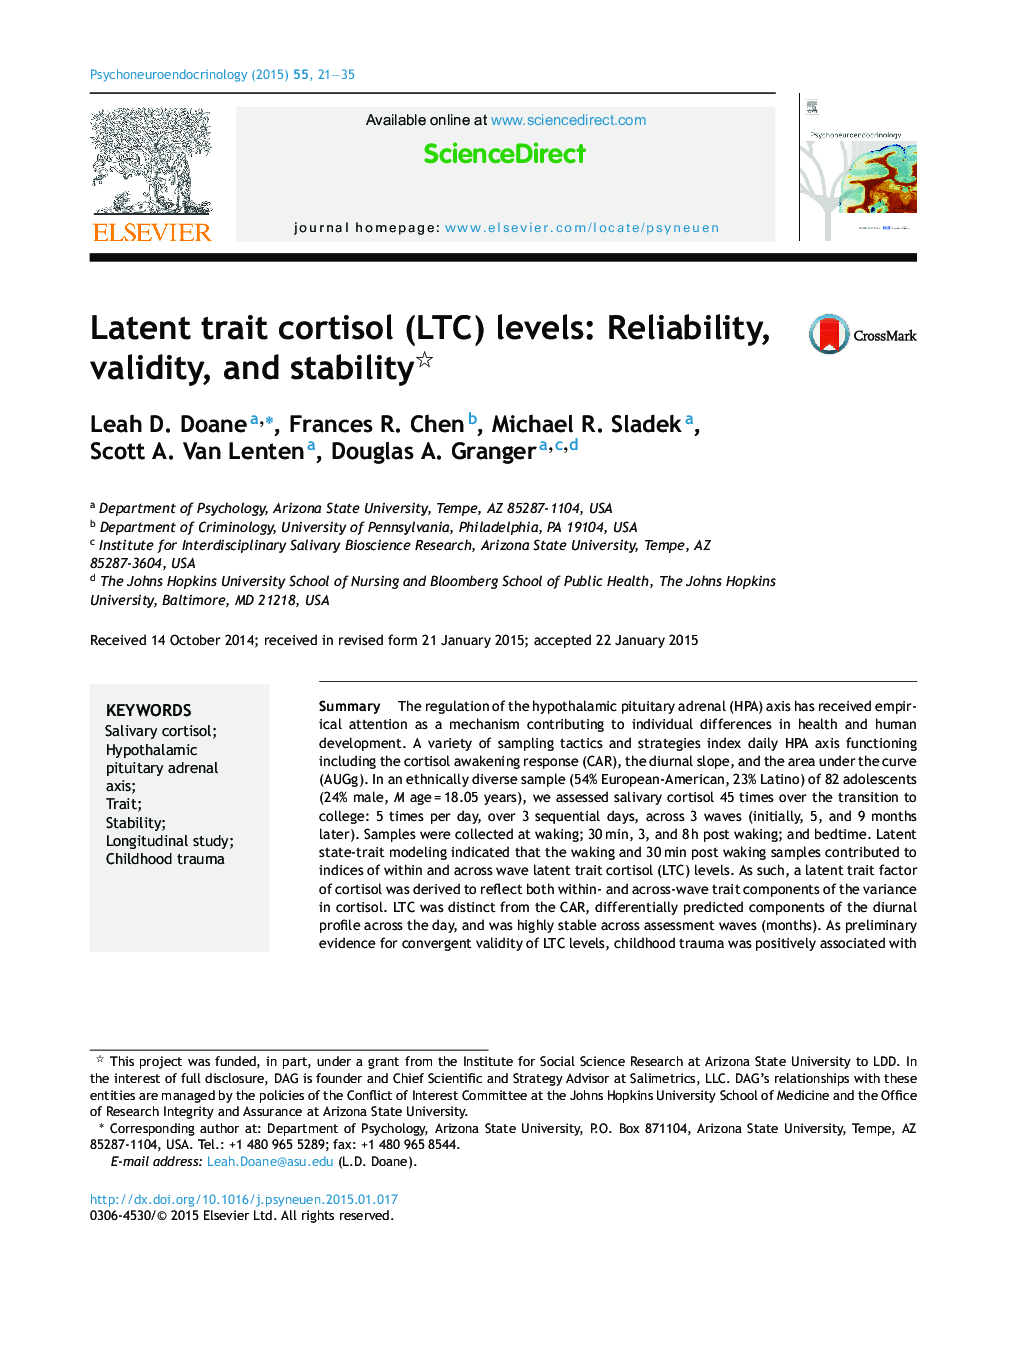 Latent trait cortisol (LTC) levels: Reliability, validity, and stability